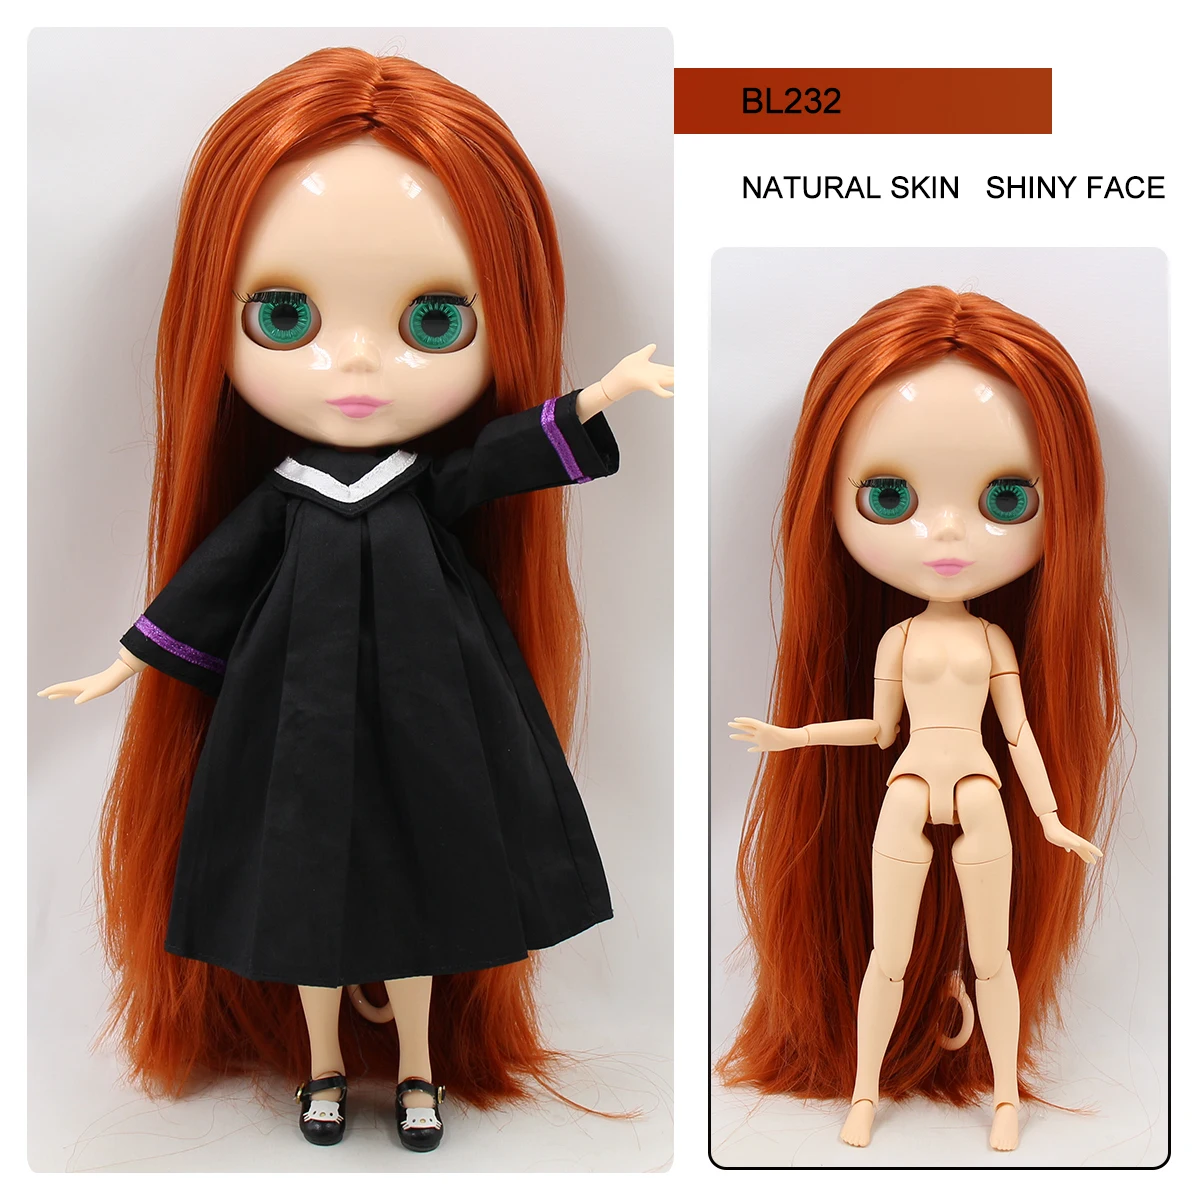 Neo Blythe Doll with Ginger Hair, Natural Skin, Shiny Face & Factory Jointed Body 2